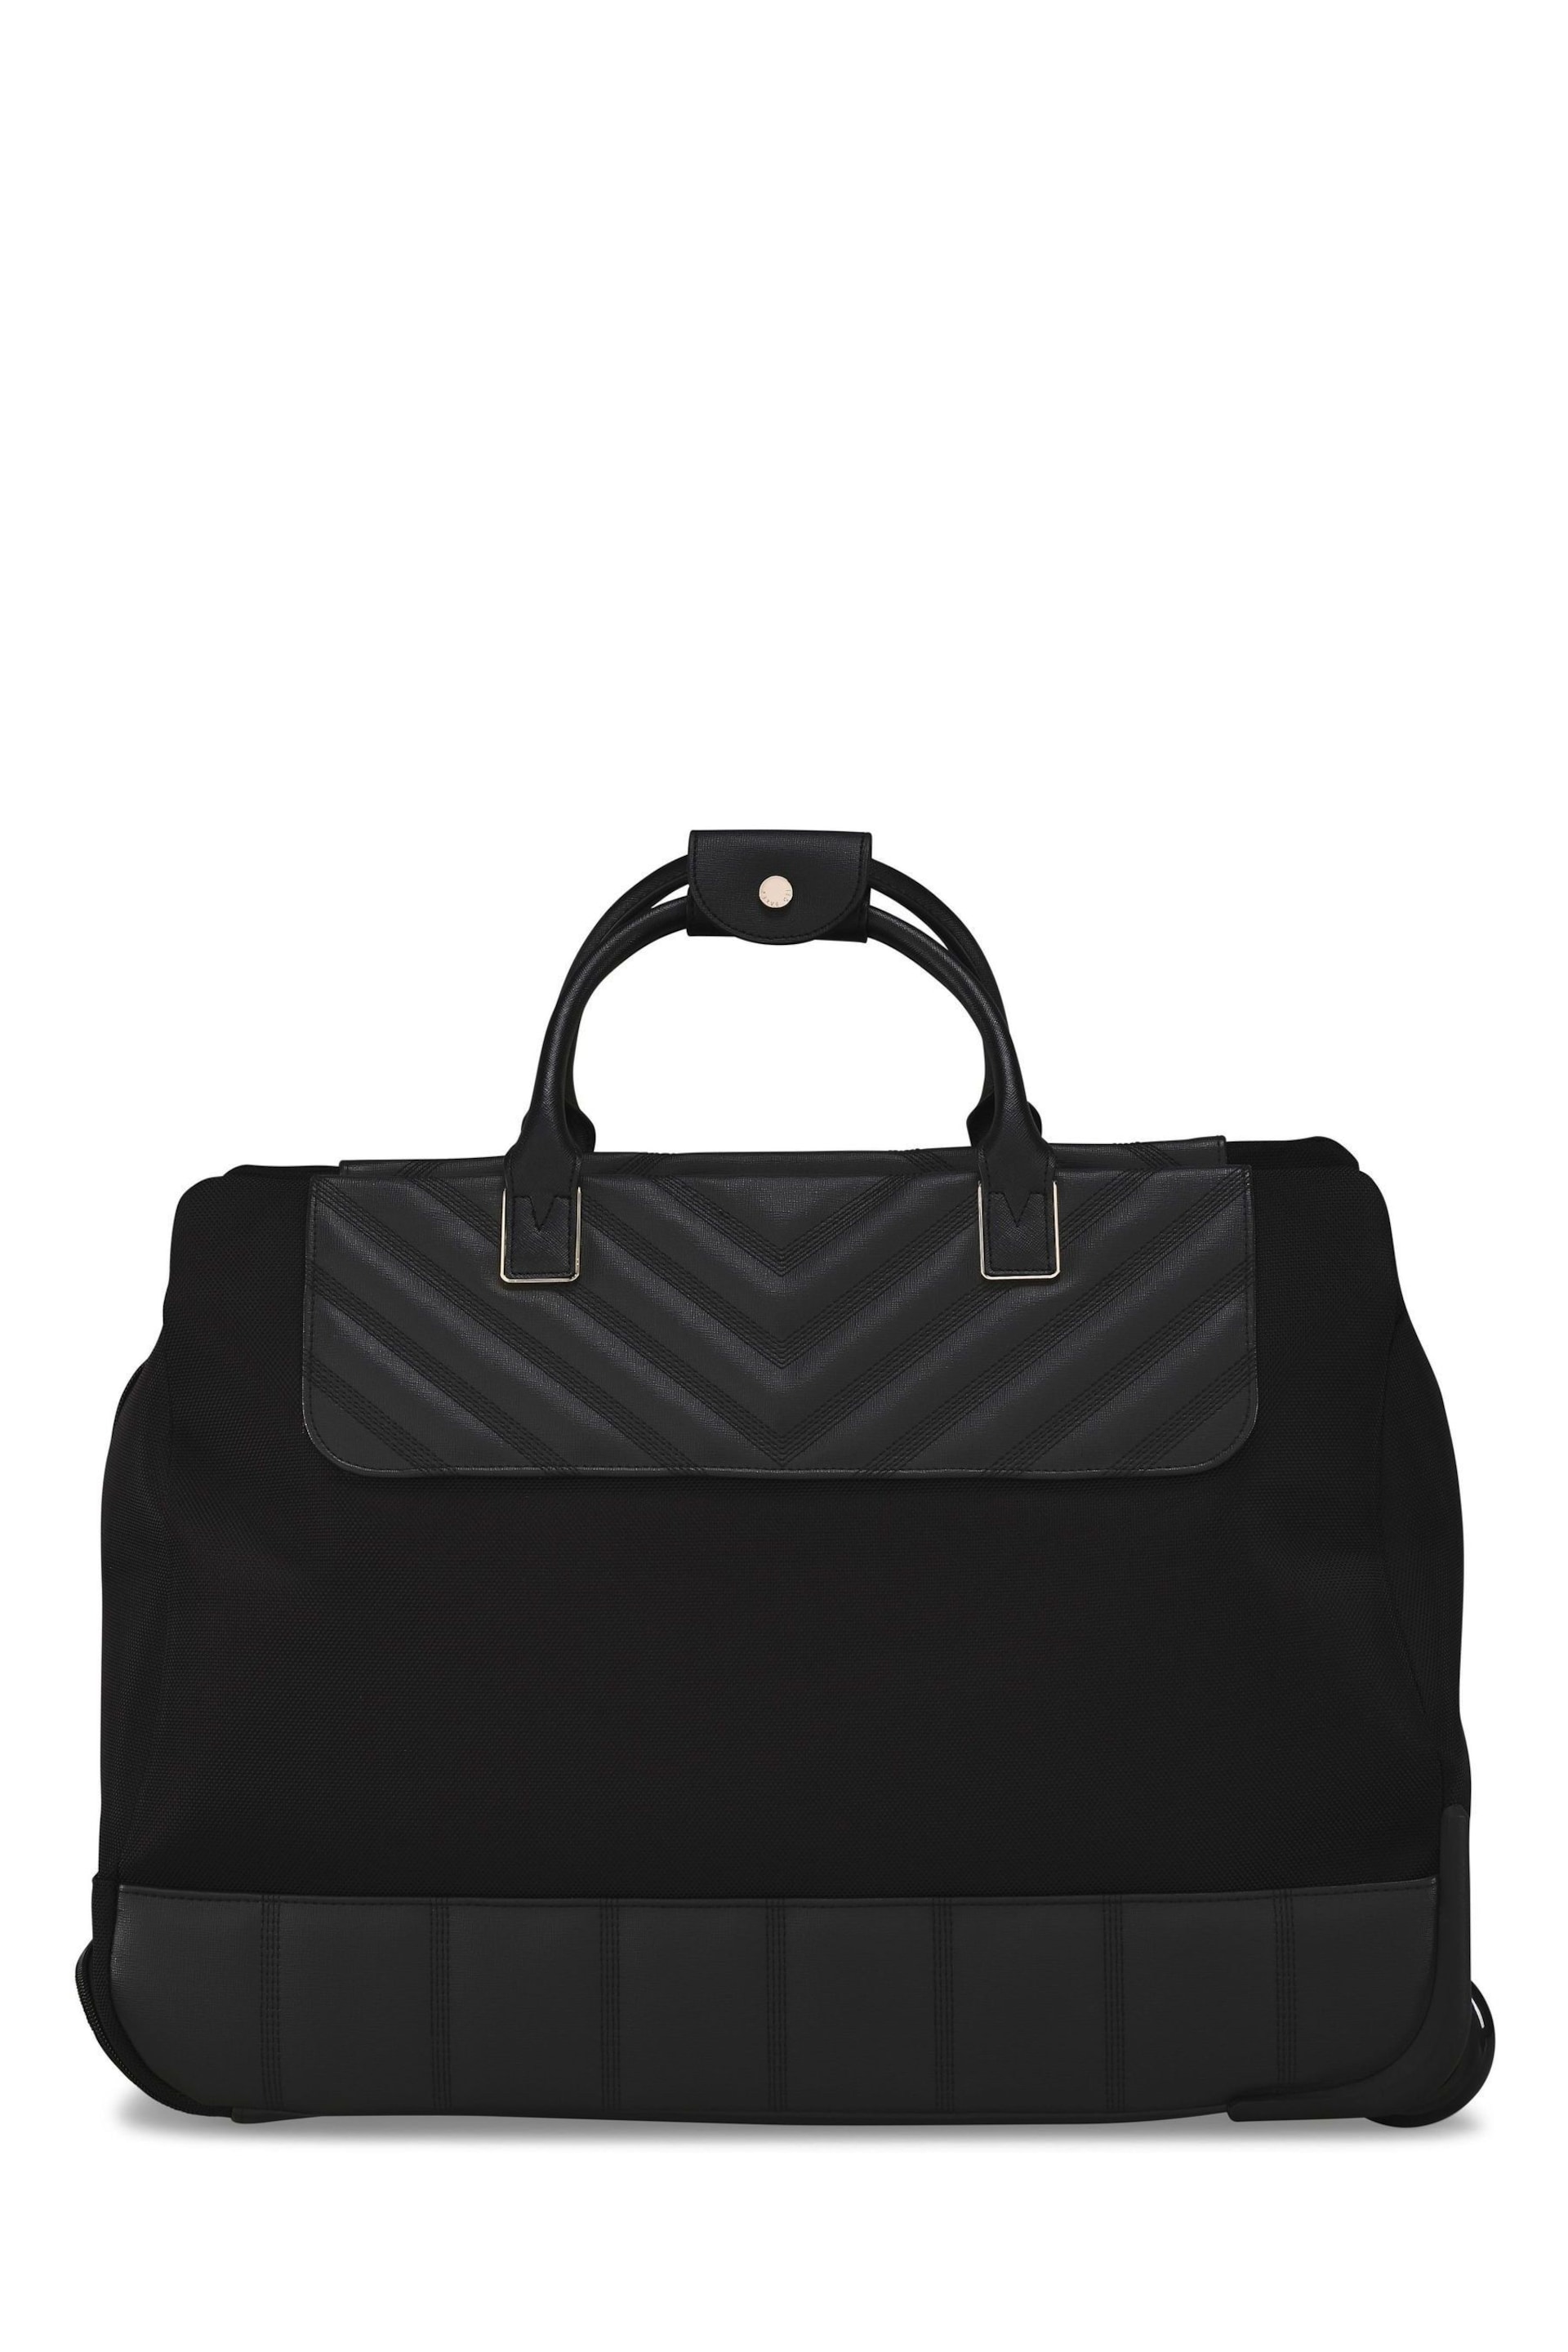 Ted Baker Black Albany Eco Small Trolley Duffle Bag - Image 2 of 3